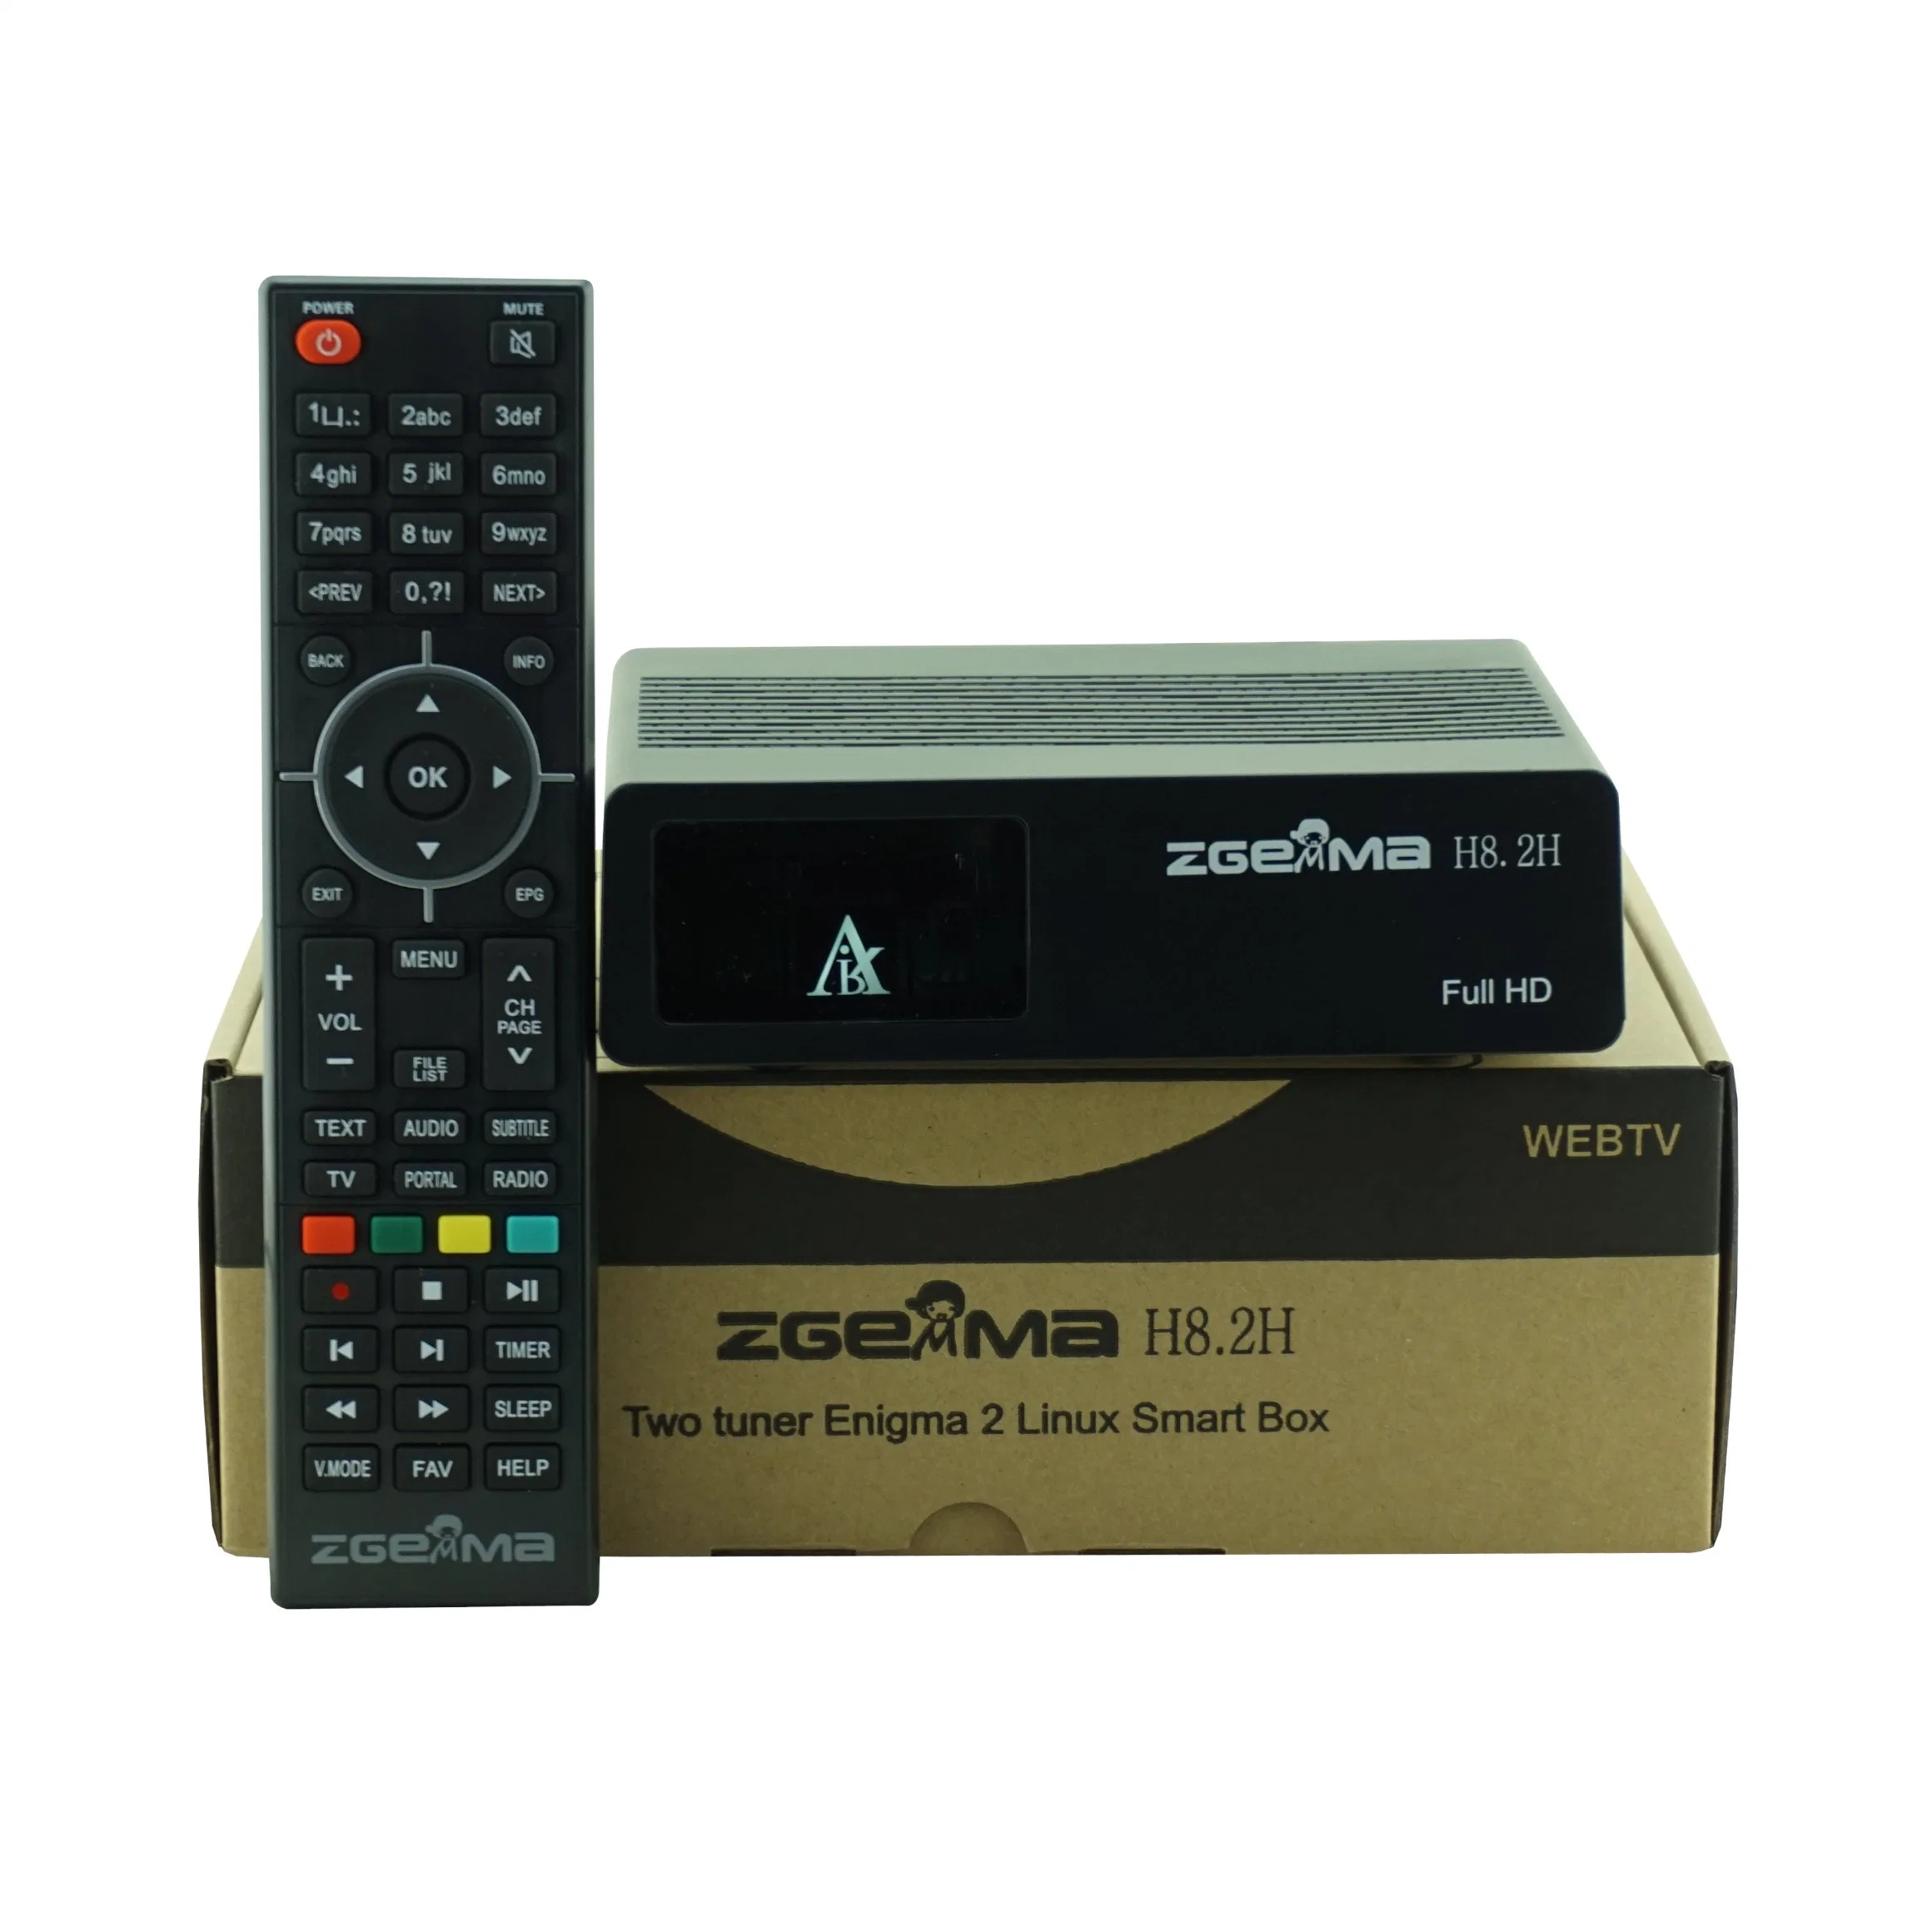 H8.2h: Europe's Ultimate Satellite TV Receiver Box with DVB-S2X + DVB-T2/C Combo Tuner, IPTV and High Definition